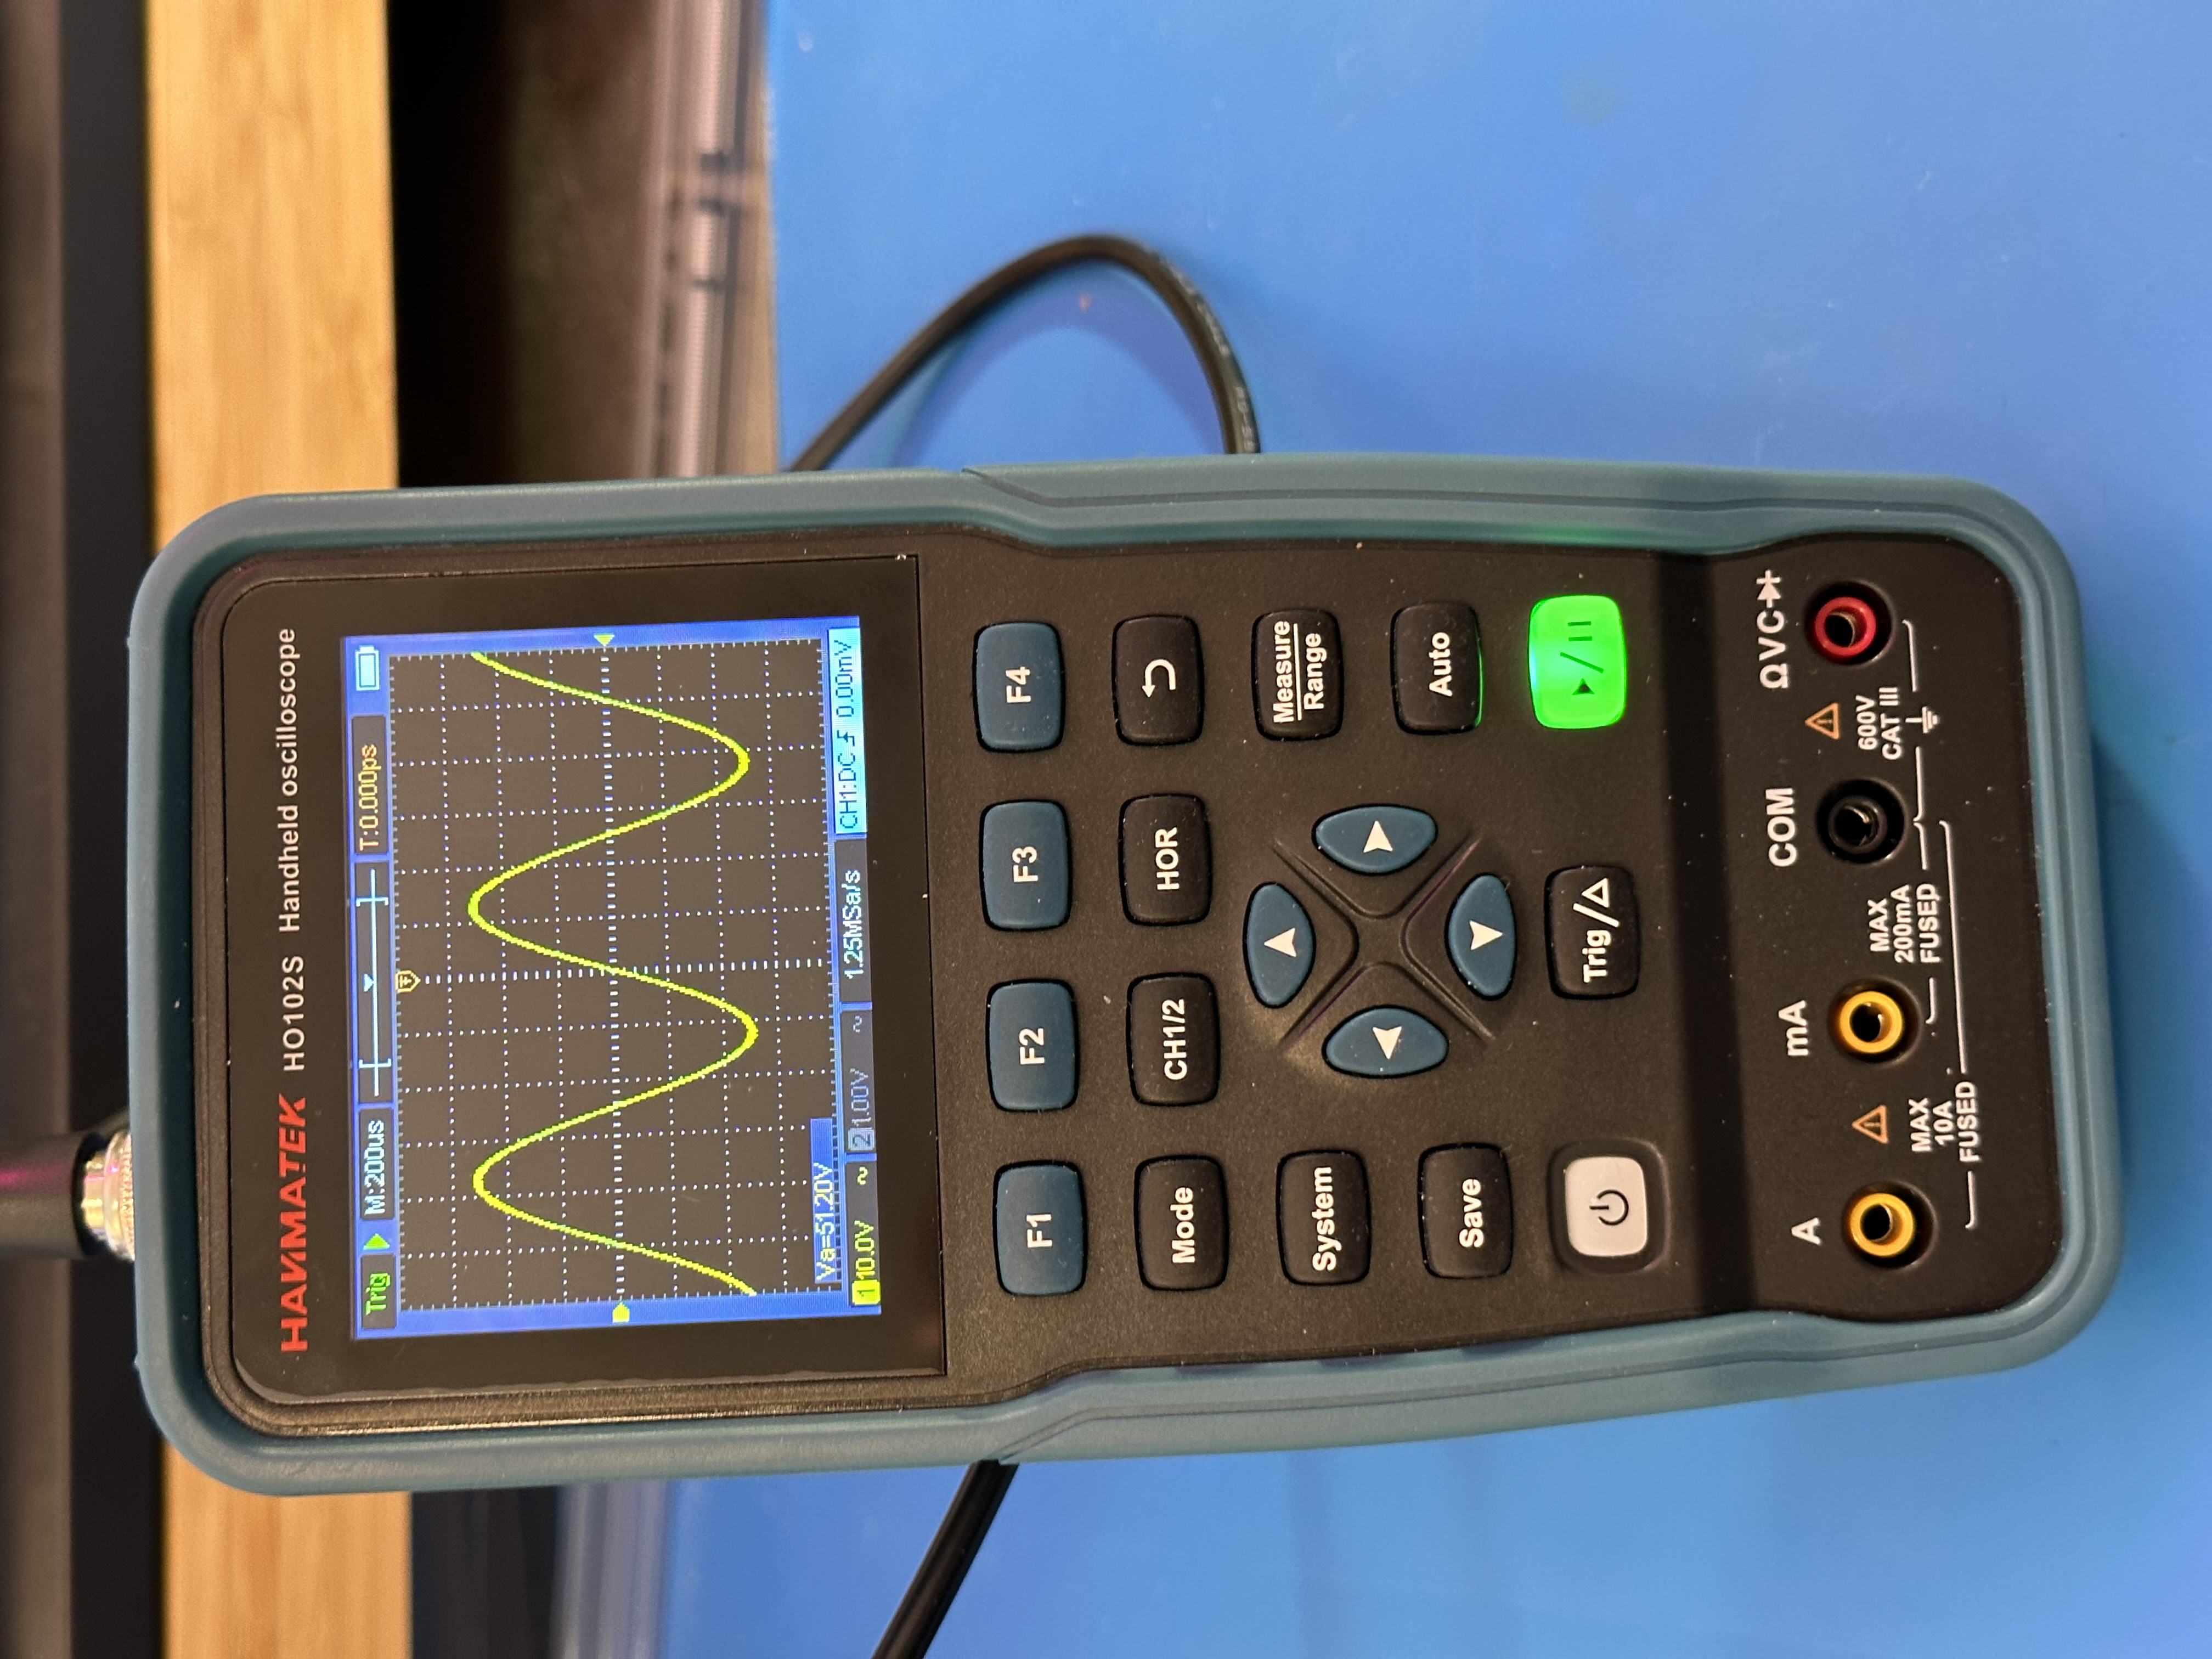 an image of a device in the form factor of a digital multimeter, but with a directional pad and a set of buttons, instead of either a DMM or a scope interface